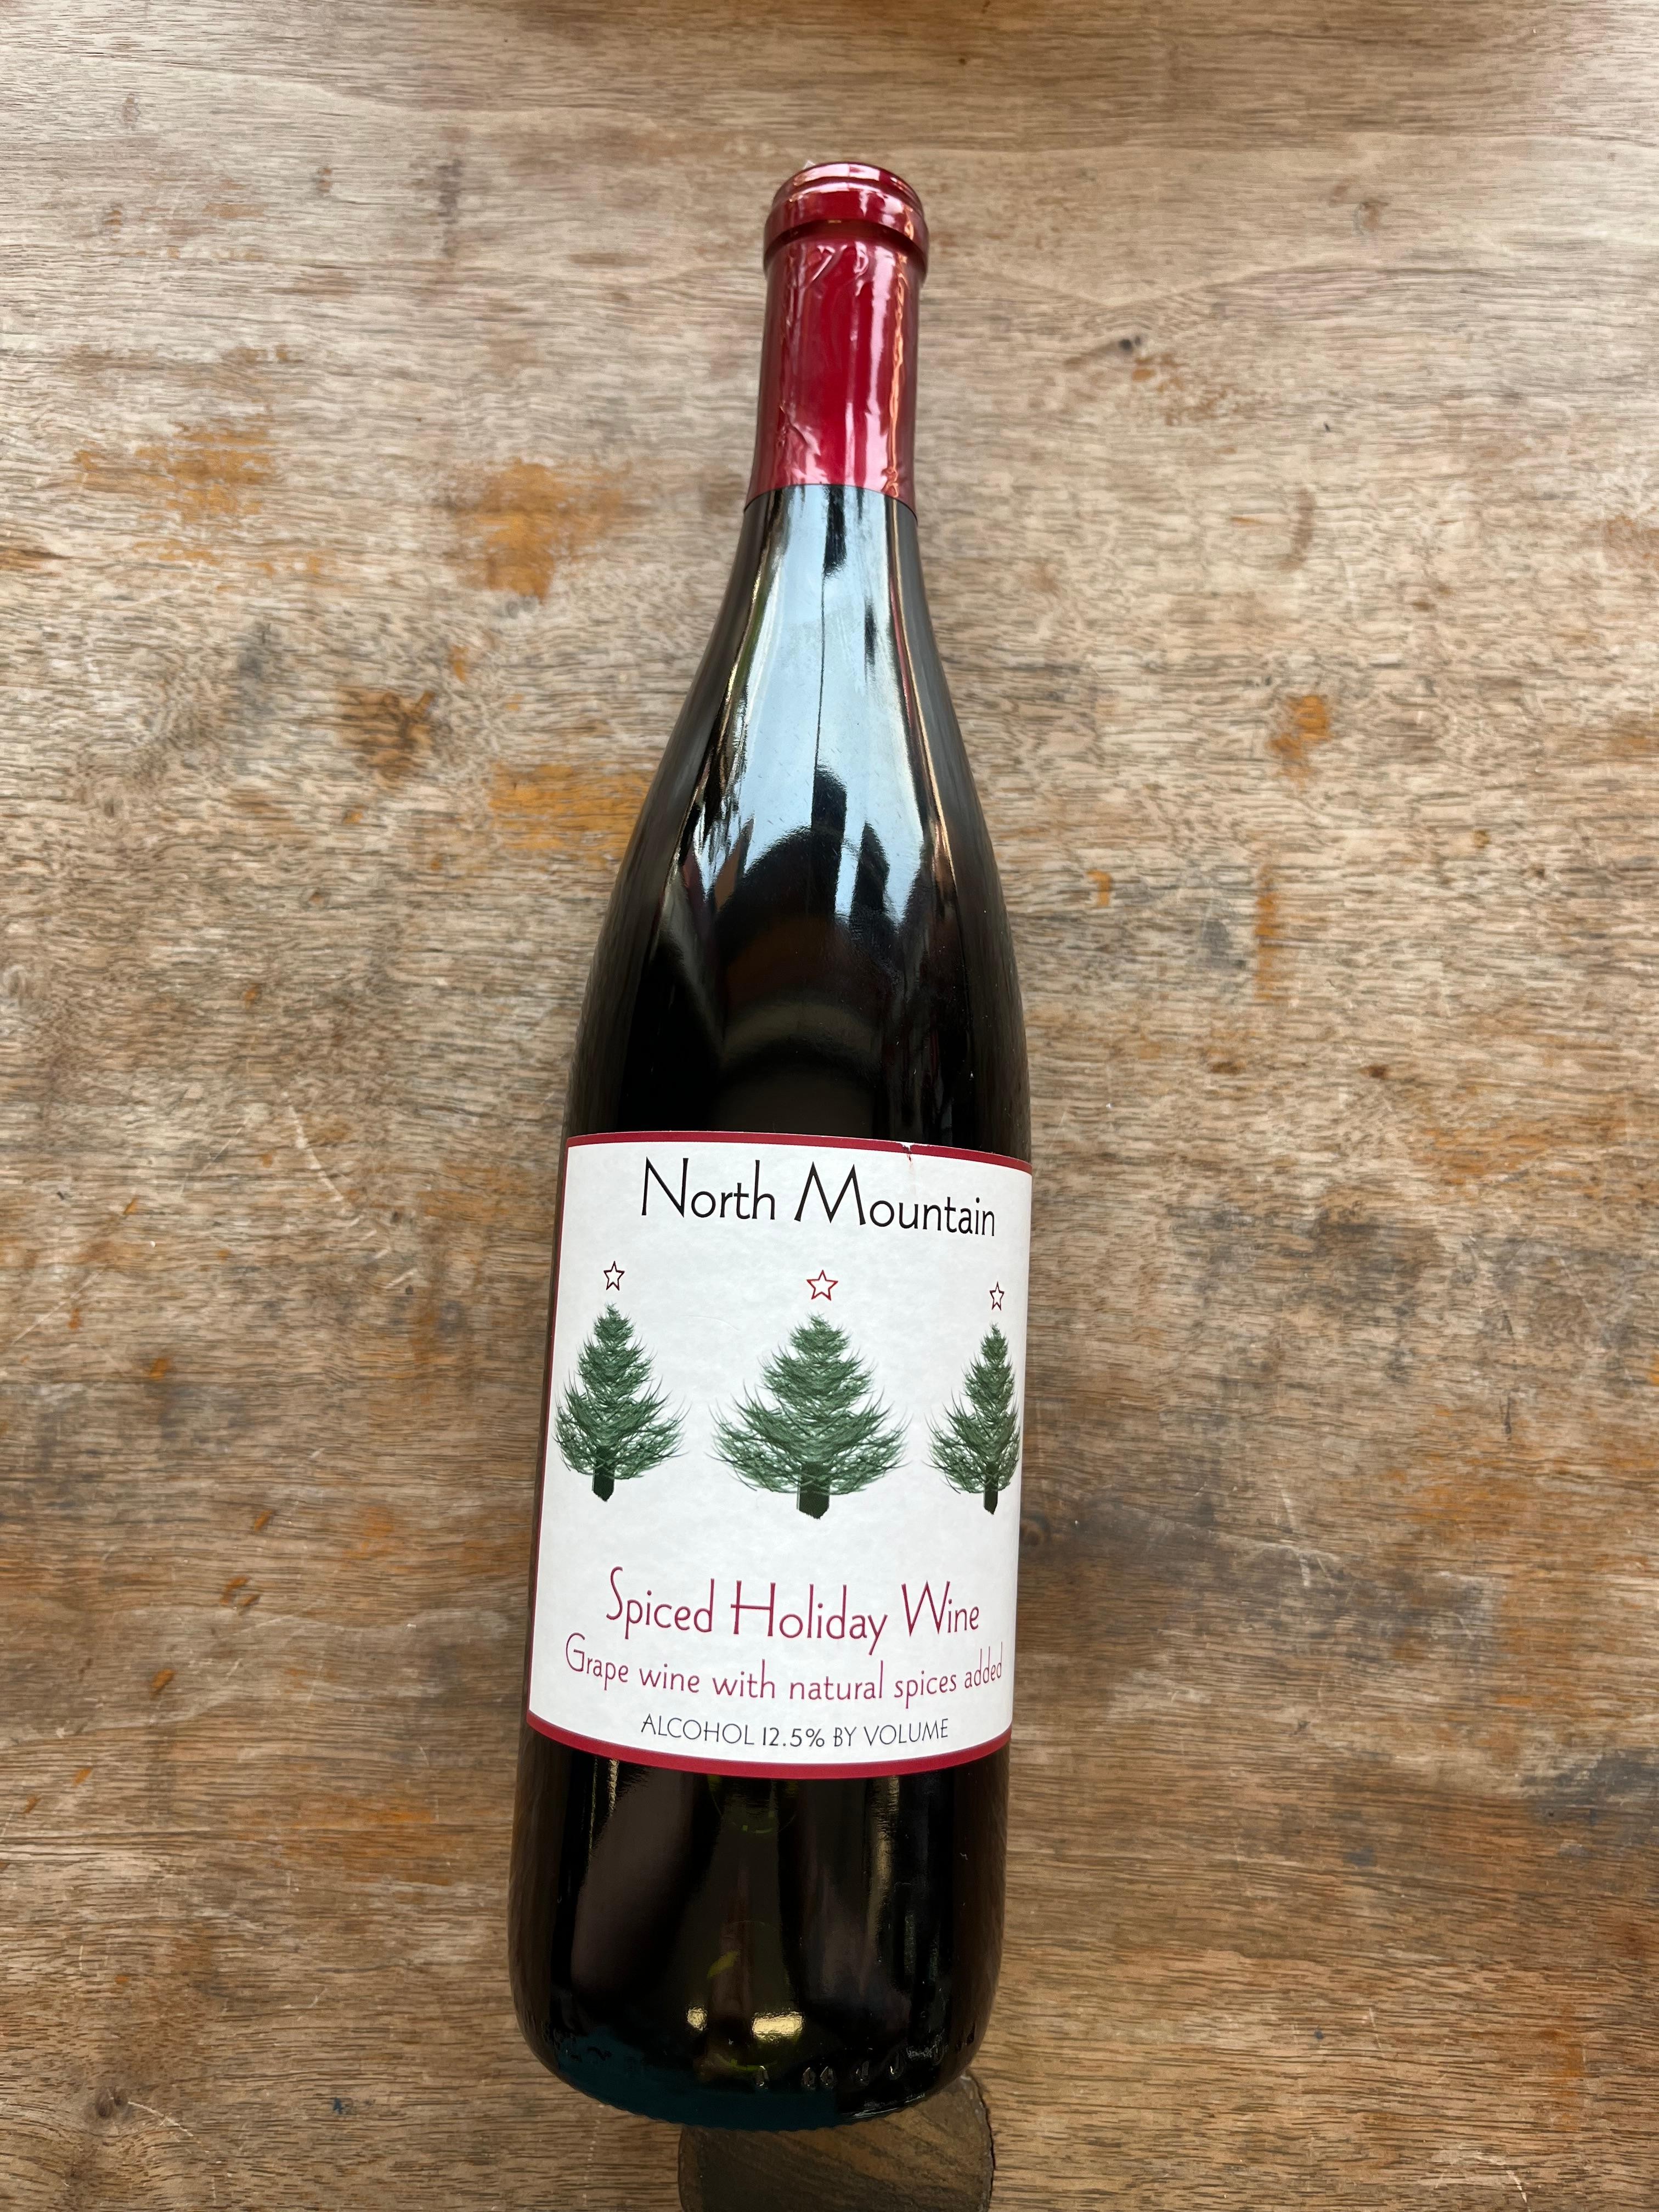 North Mountain Spiced Holiday Wine